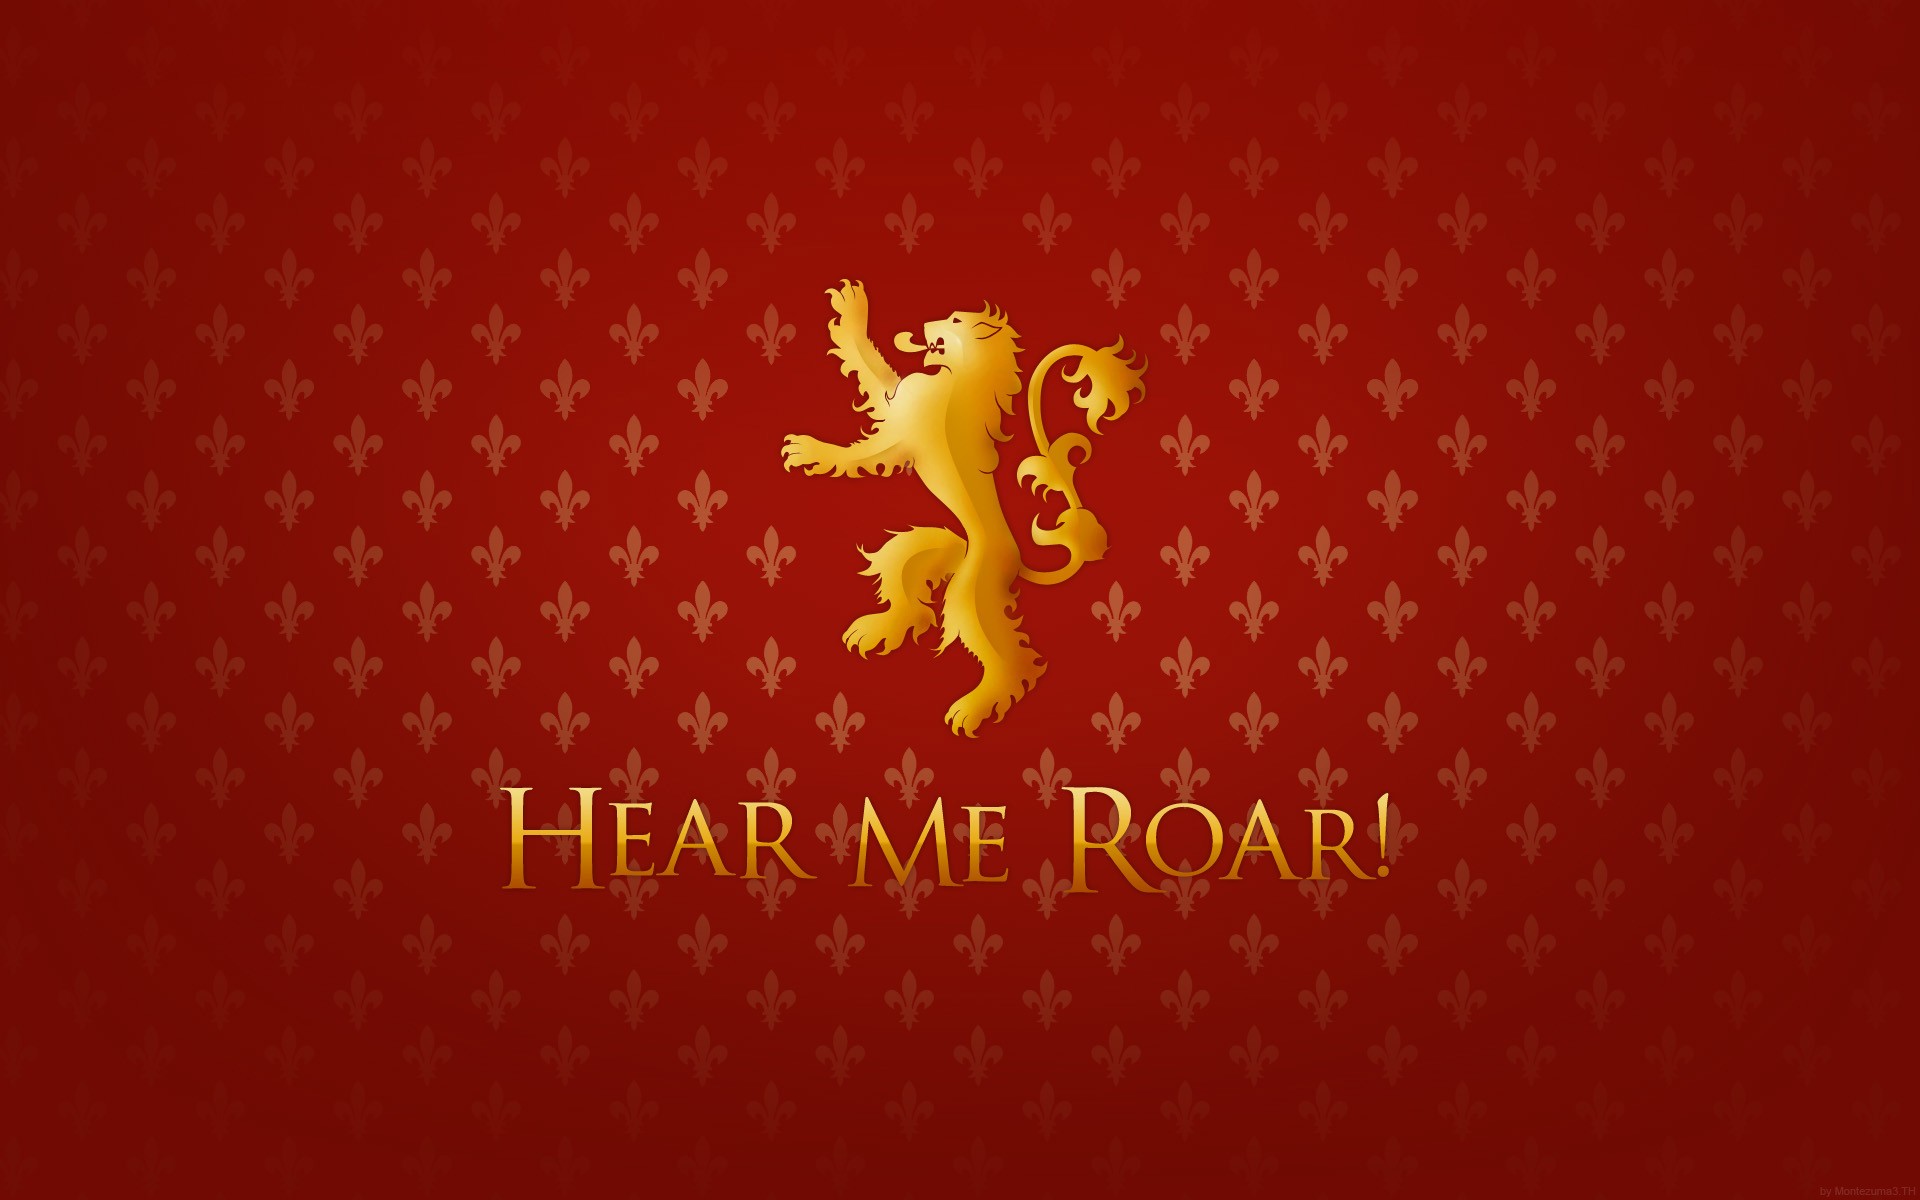 game, Of, Thrones, A, Song, Of, Ice, And, Fire, Lions, Tv, Series, House, Lannister Wallpaper